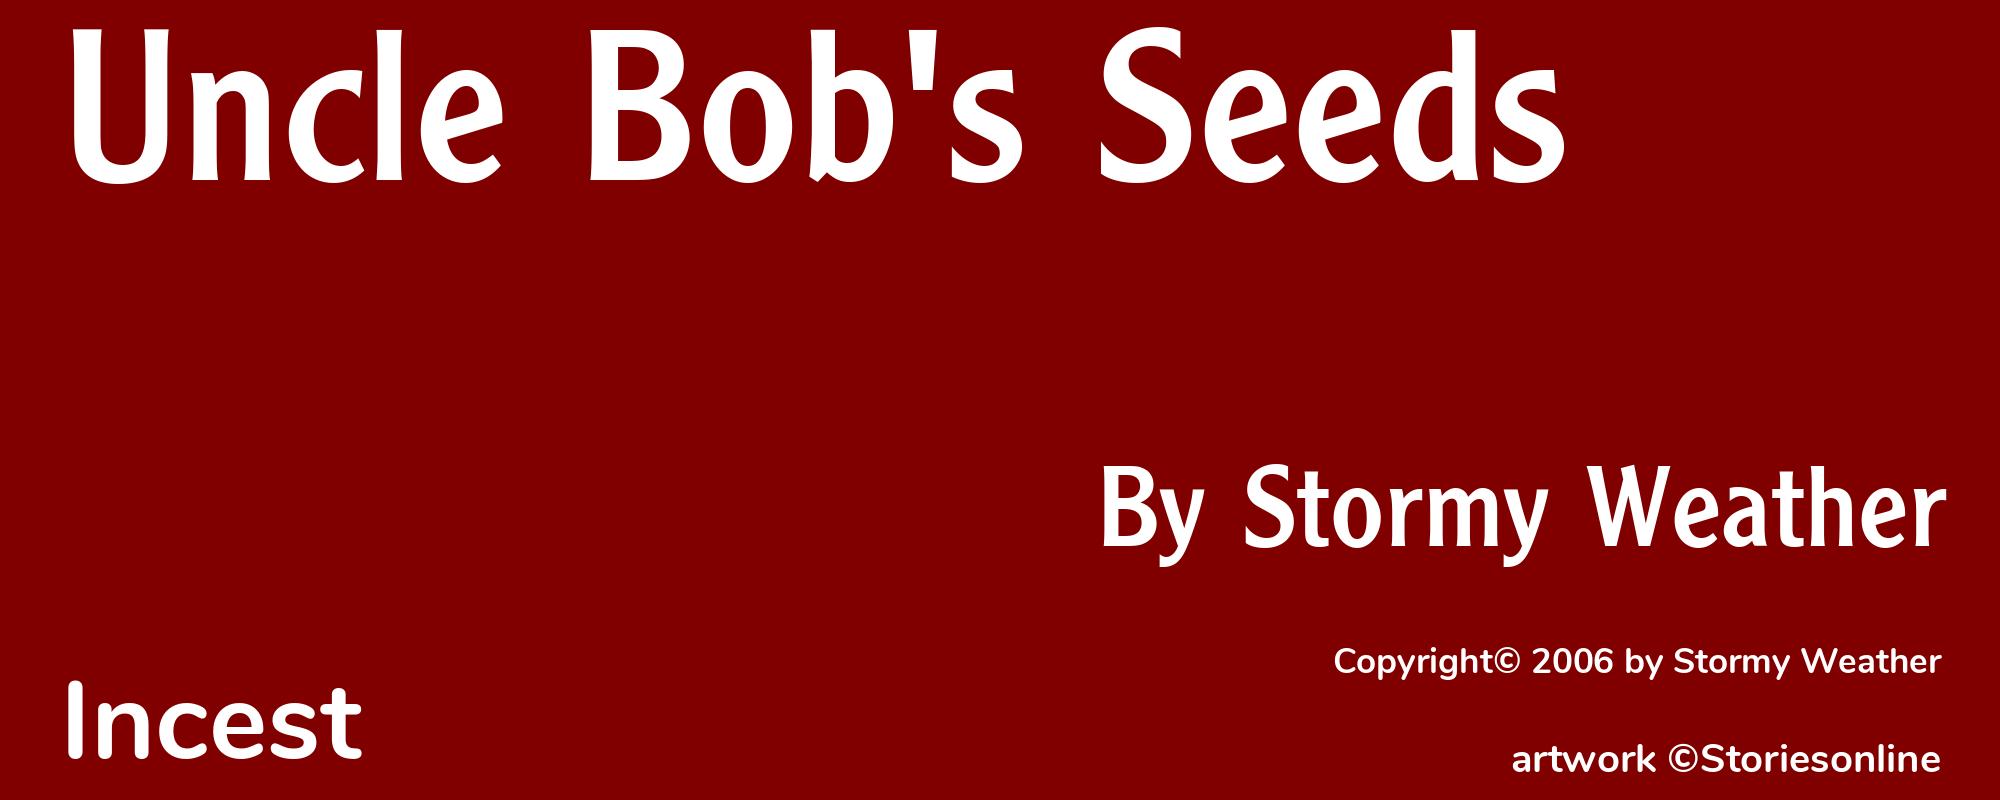 Uncle Bob's Seeds - Cover